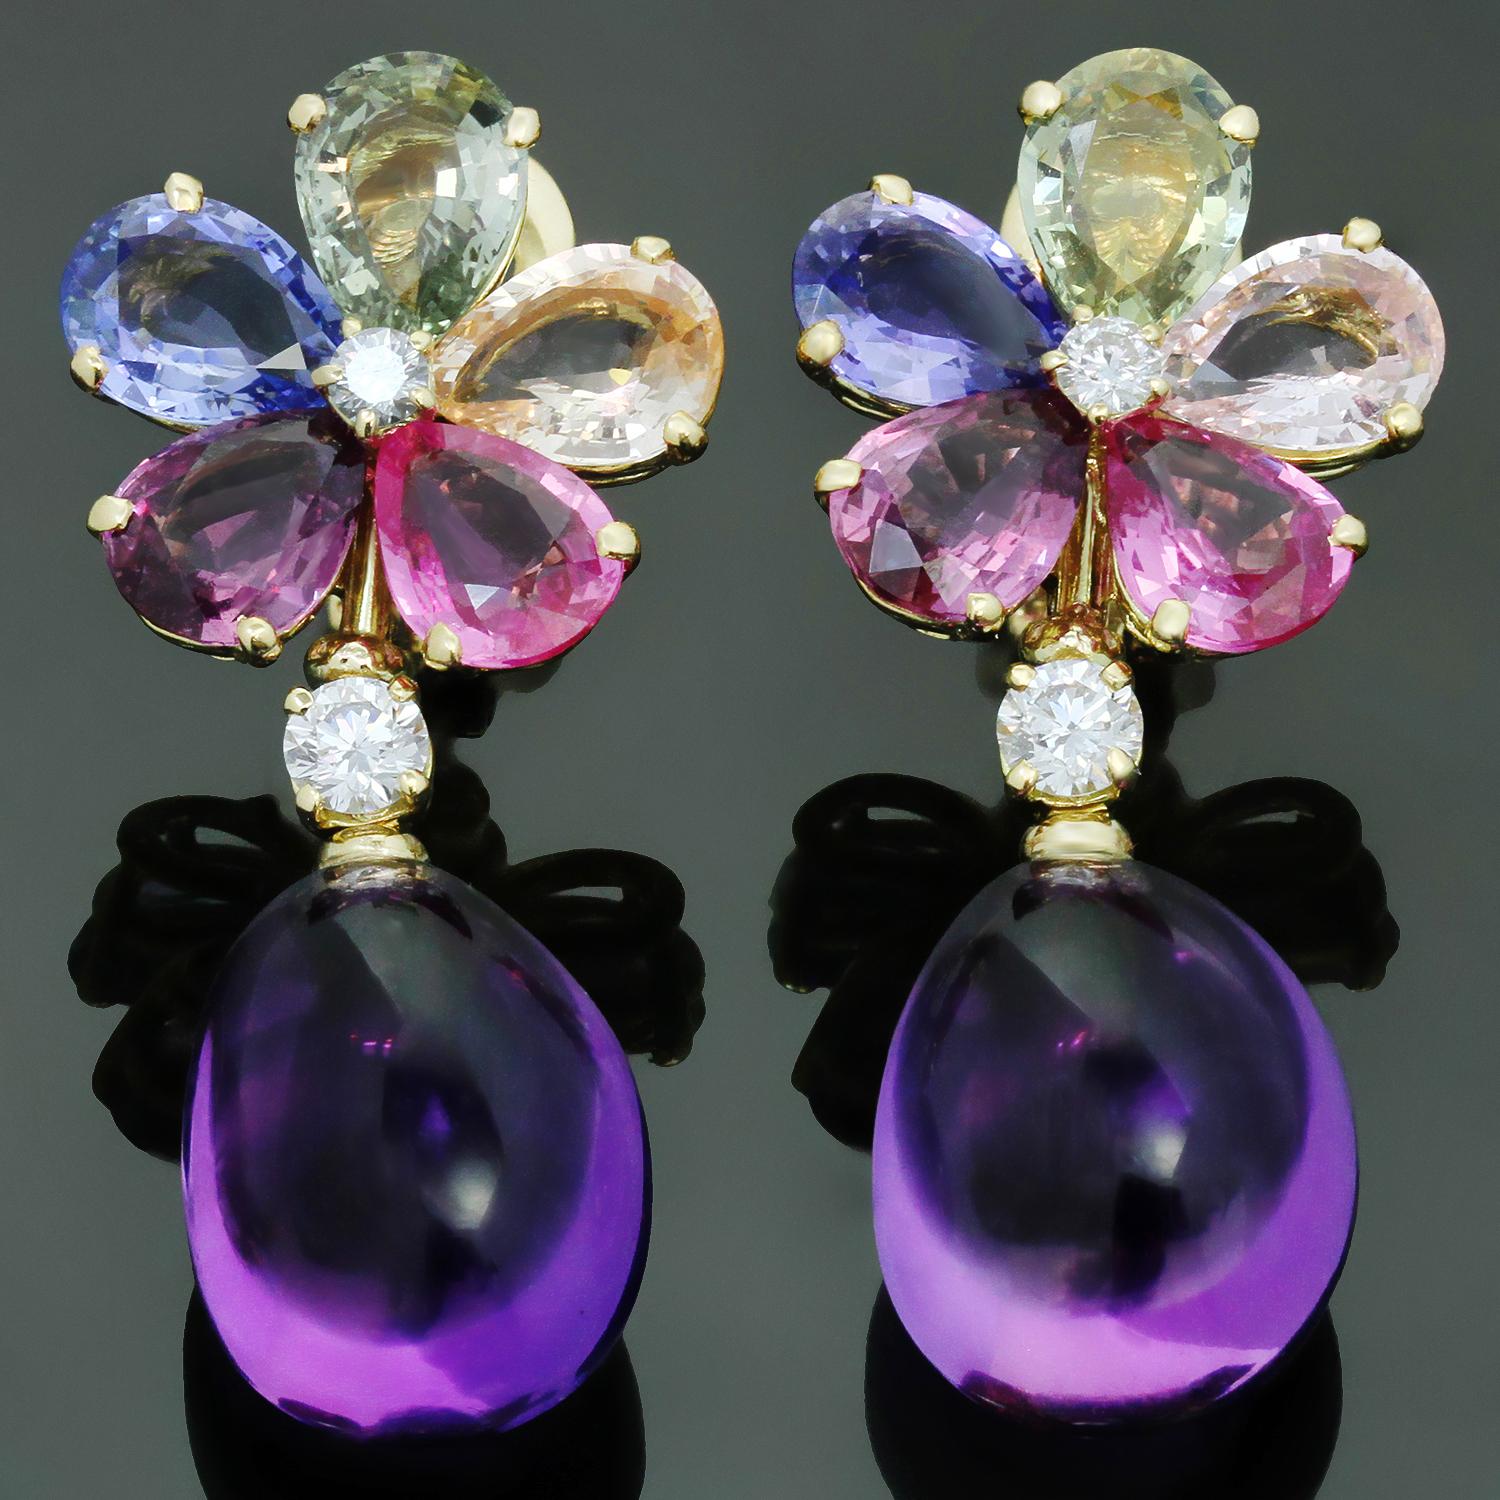 These fabulous Bulgari drop earrings are crafted in 18k yellow gold and feature sparkling florets of multicolored sapphires accented with brilliant-cut round diamonds and cabochon amethyst drops. The 10 multi-colored pear-shaped sapphires weigh an